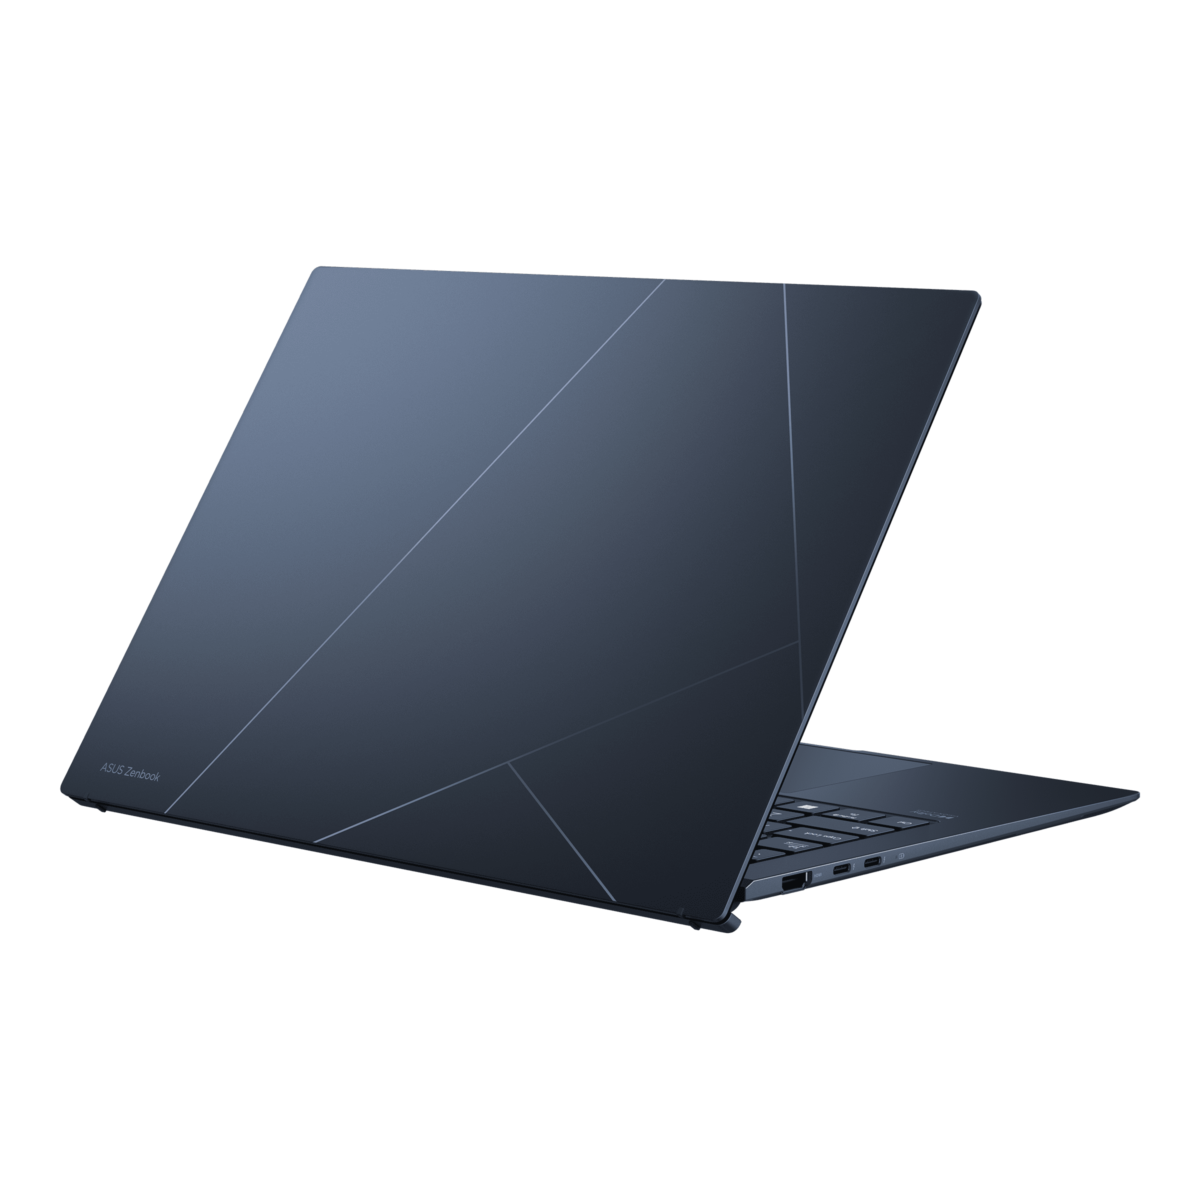 The chassis of the new Zenbook S 13 OLED series is made of aluminium alloy, with clean lines and a svelte silhouette that turns heads. The new lid design features the ASUS monogram with refreshing new colours and materials across the series. The ASUS Zenbook S 13 OLED series is available in two colour schemes: Ponder Blue.